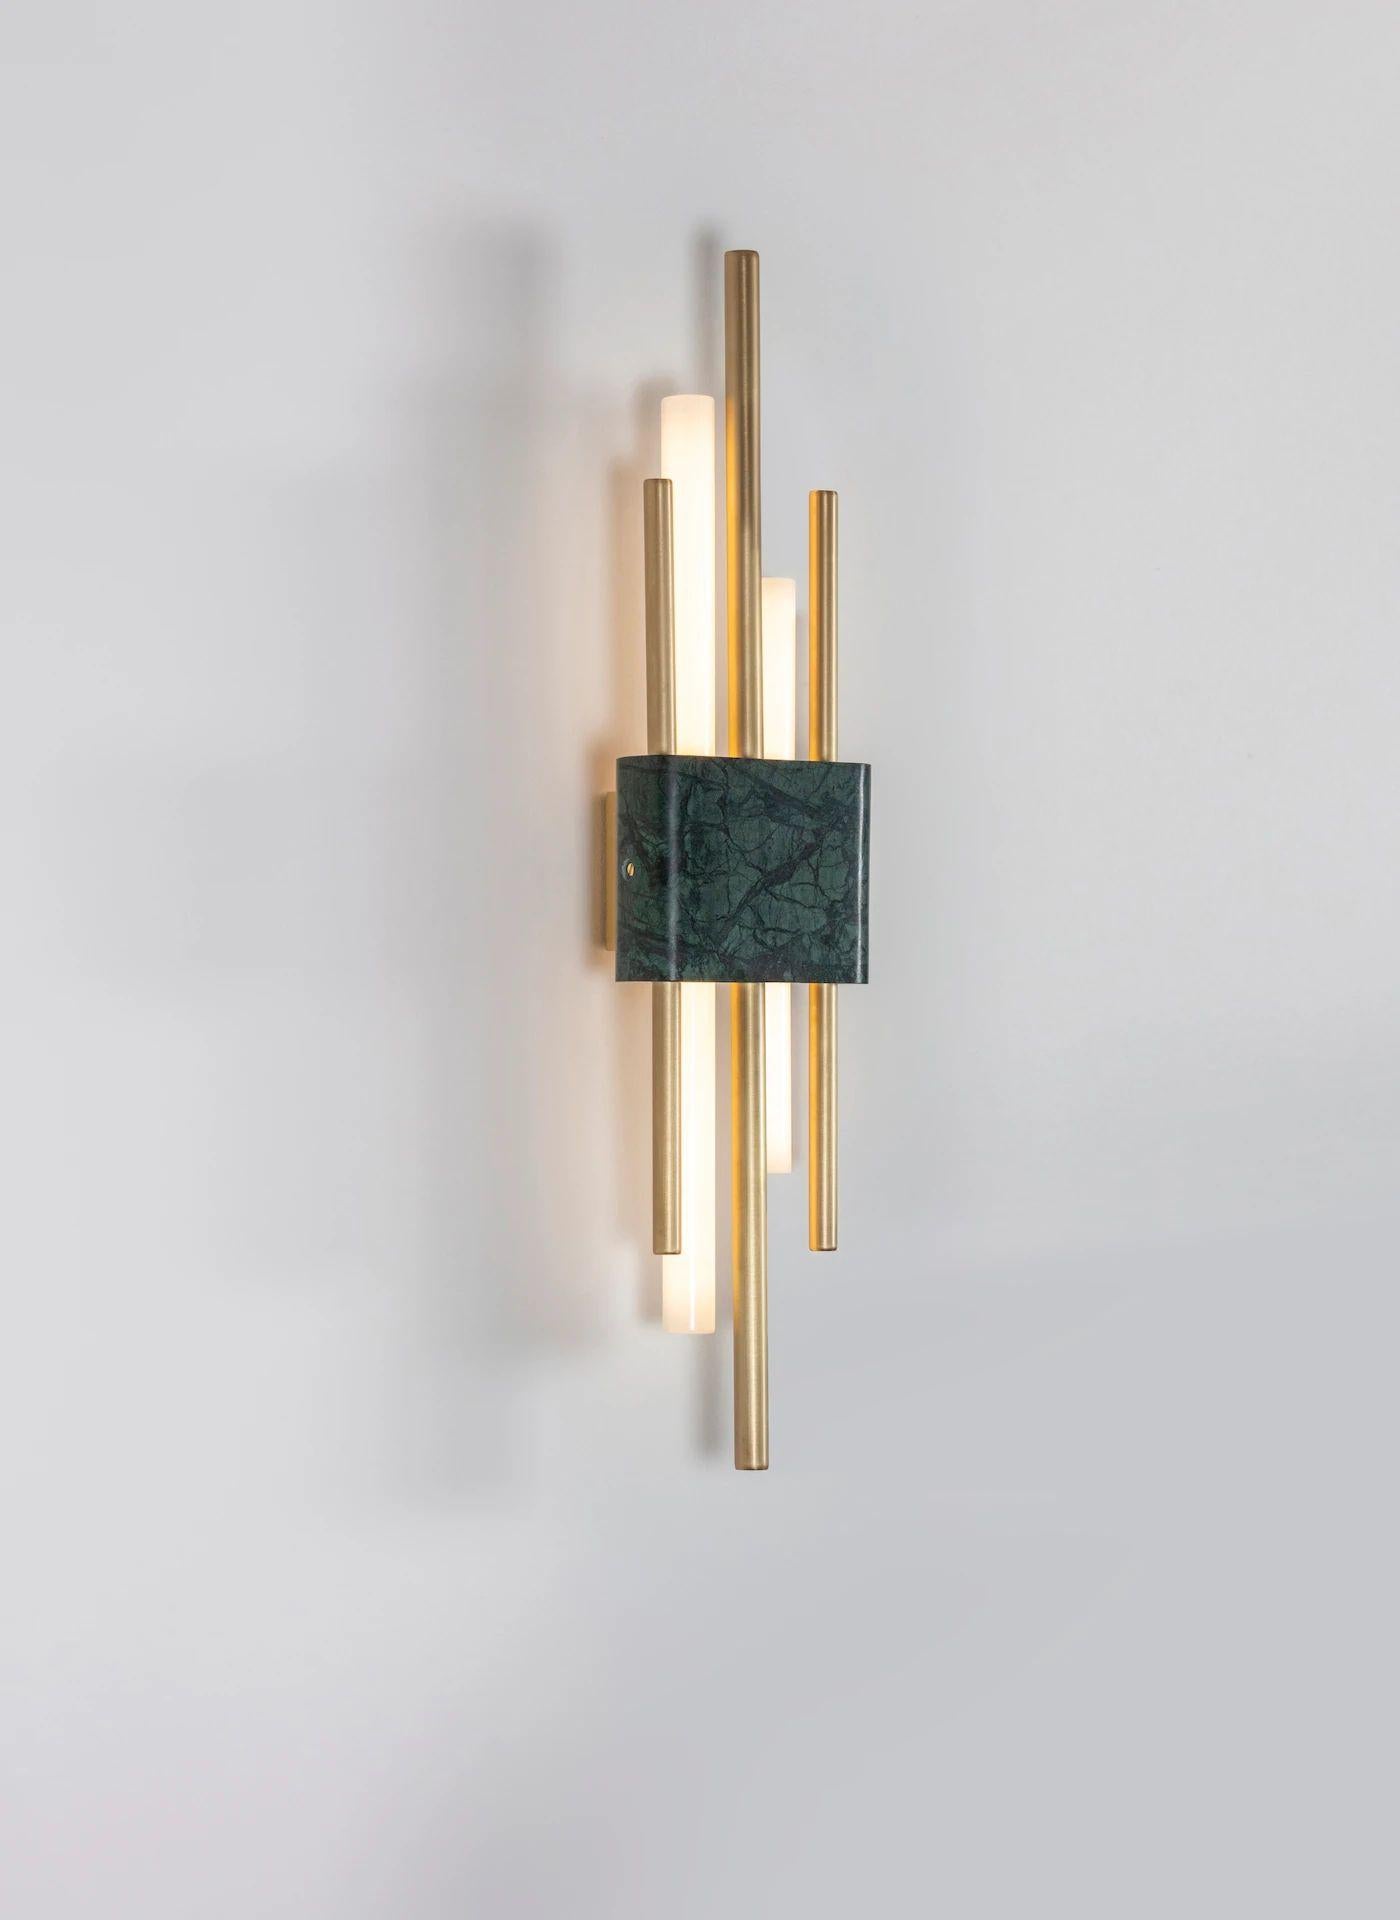 Tanto wall light, double, green marble by Bert Frank
Dimensions: 15 x 9 x H 65 cm
Materials: brushed brass, white carrara marble

When Adam Yeats and Robbie Llewellyn founded Bert Frank in 2013 it was a meeting of minds and the start of a